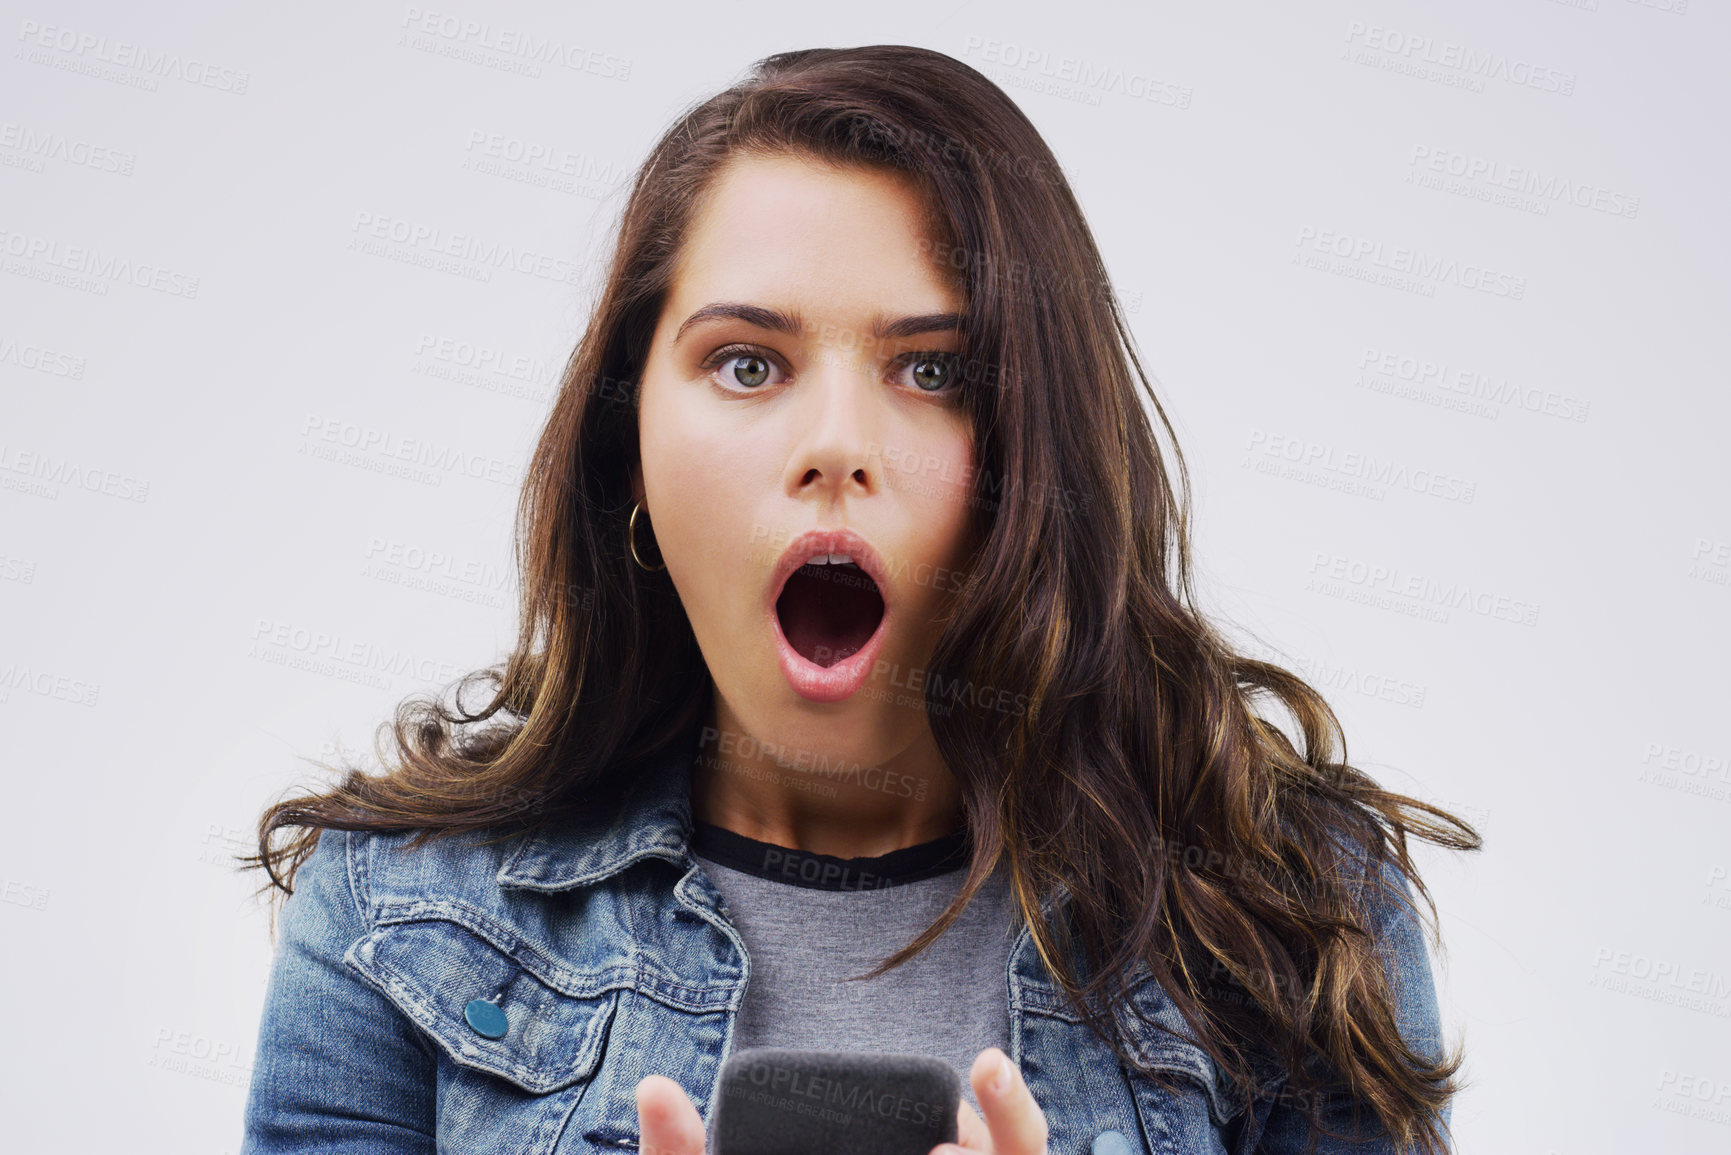 Buy stock photo Shot of a young woman looking surprised while reading something on her cellphone